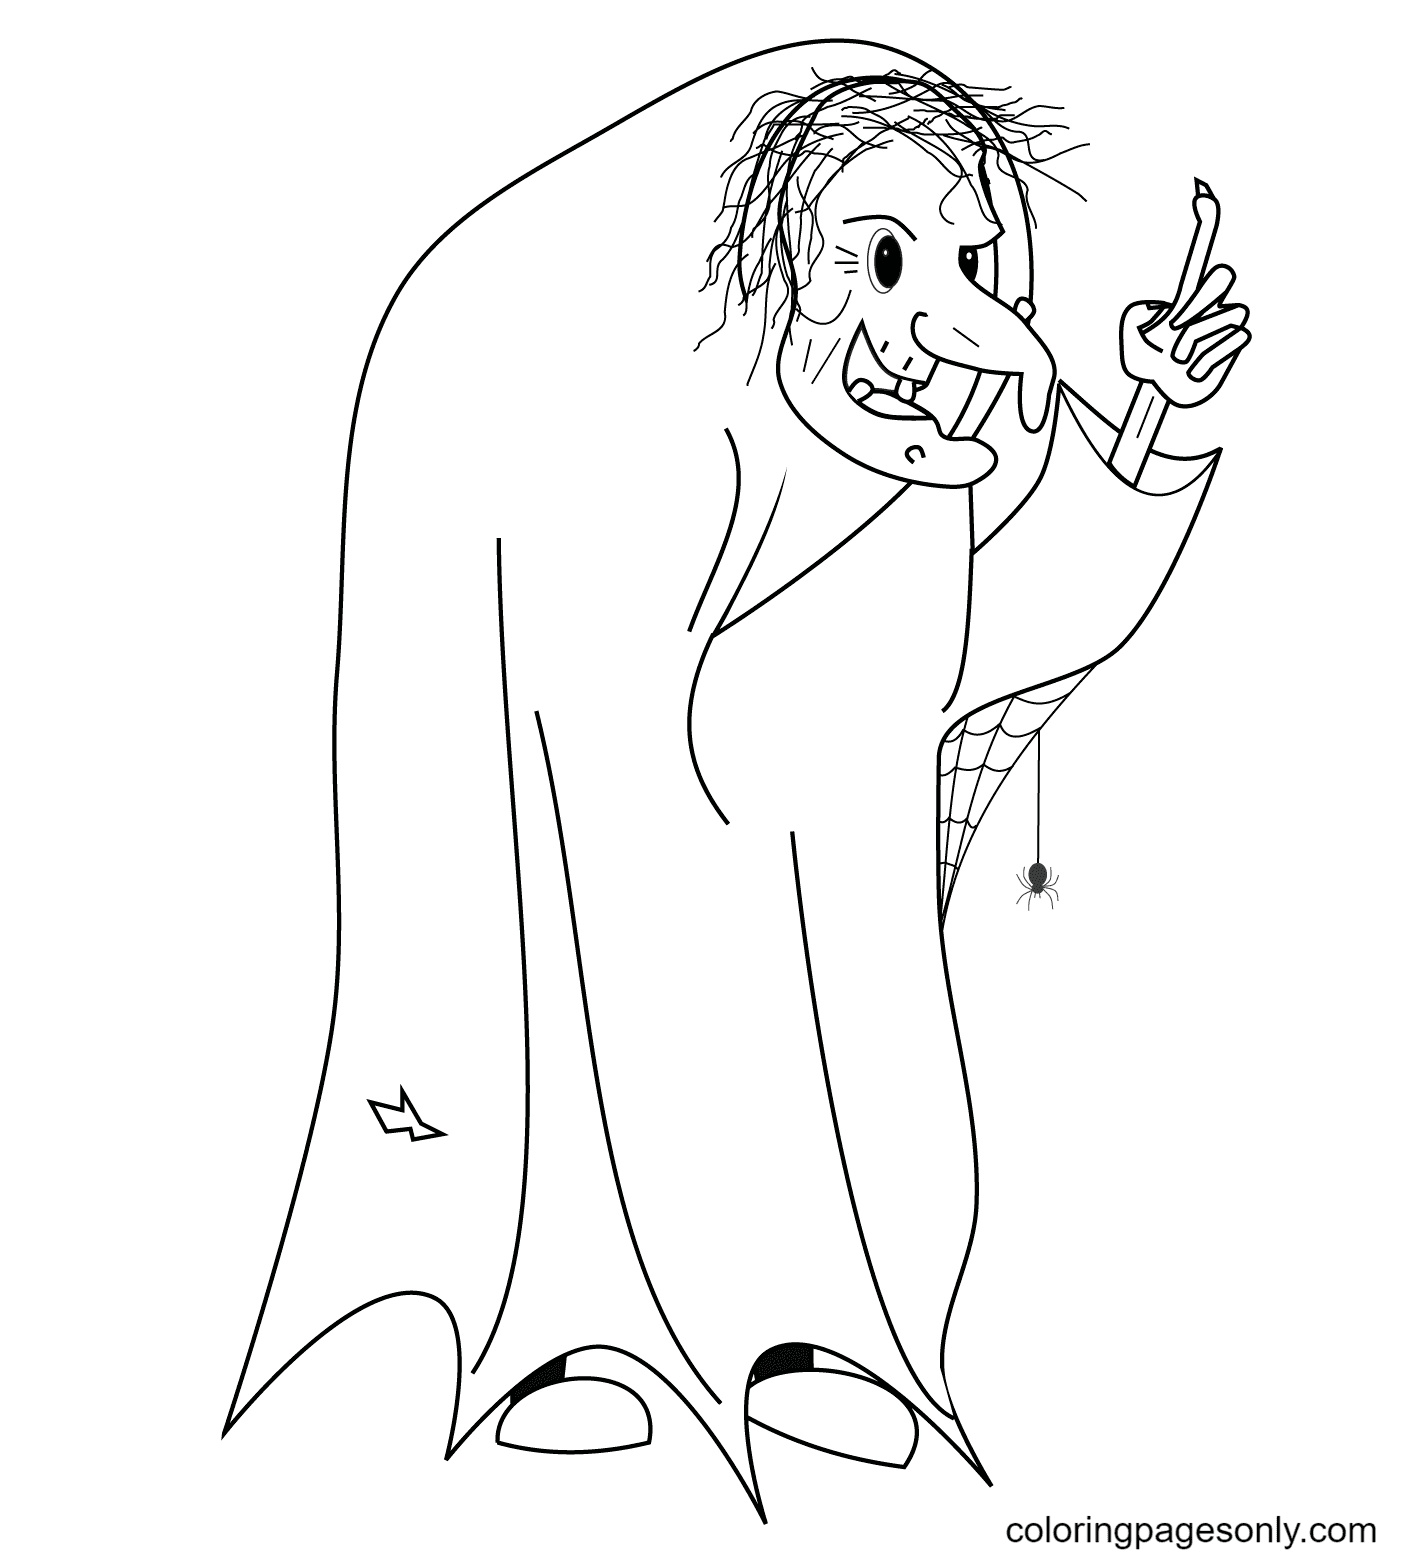 Old Witch Coloring Page